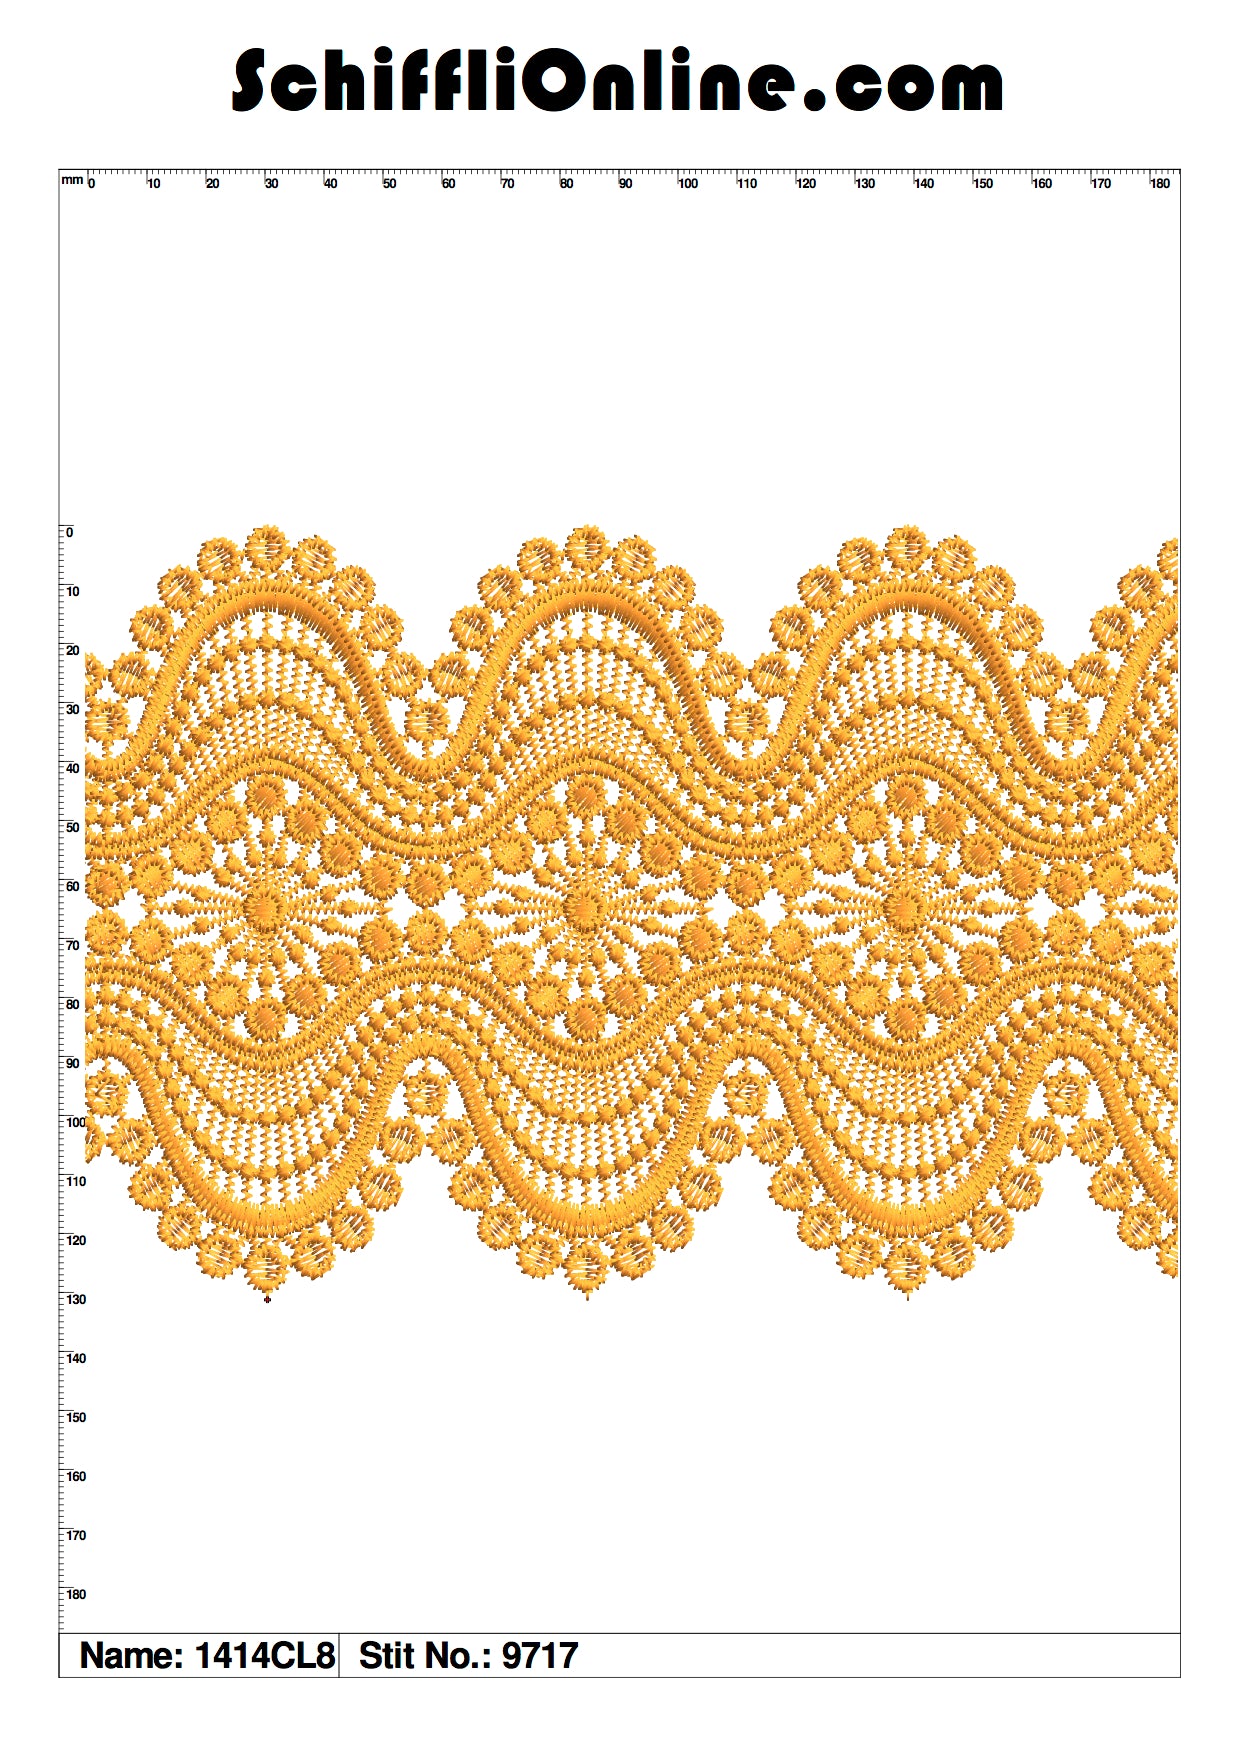 Book 145 CHEMICAL LACE 8X4 50 DESIGNS